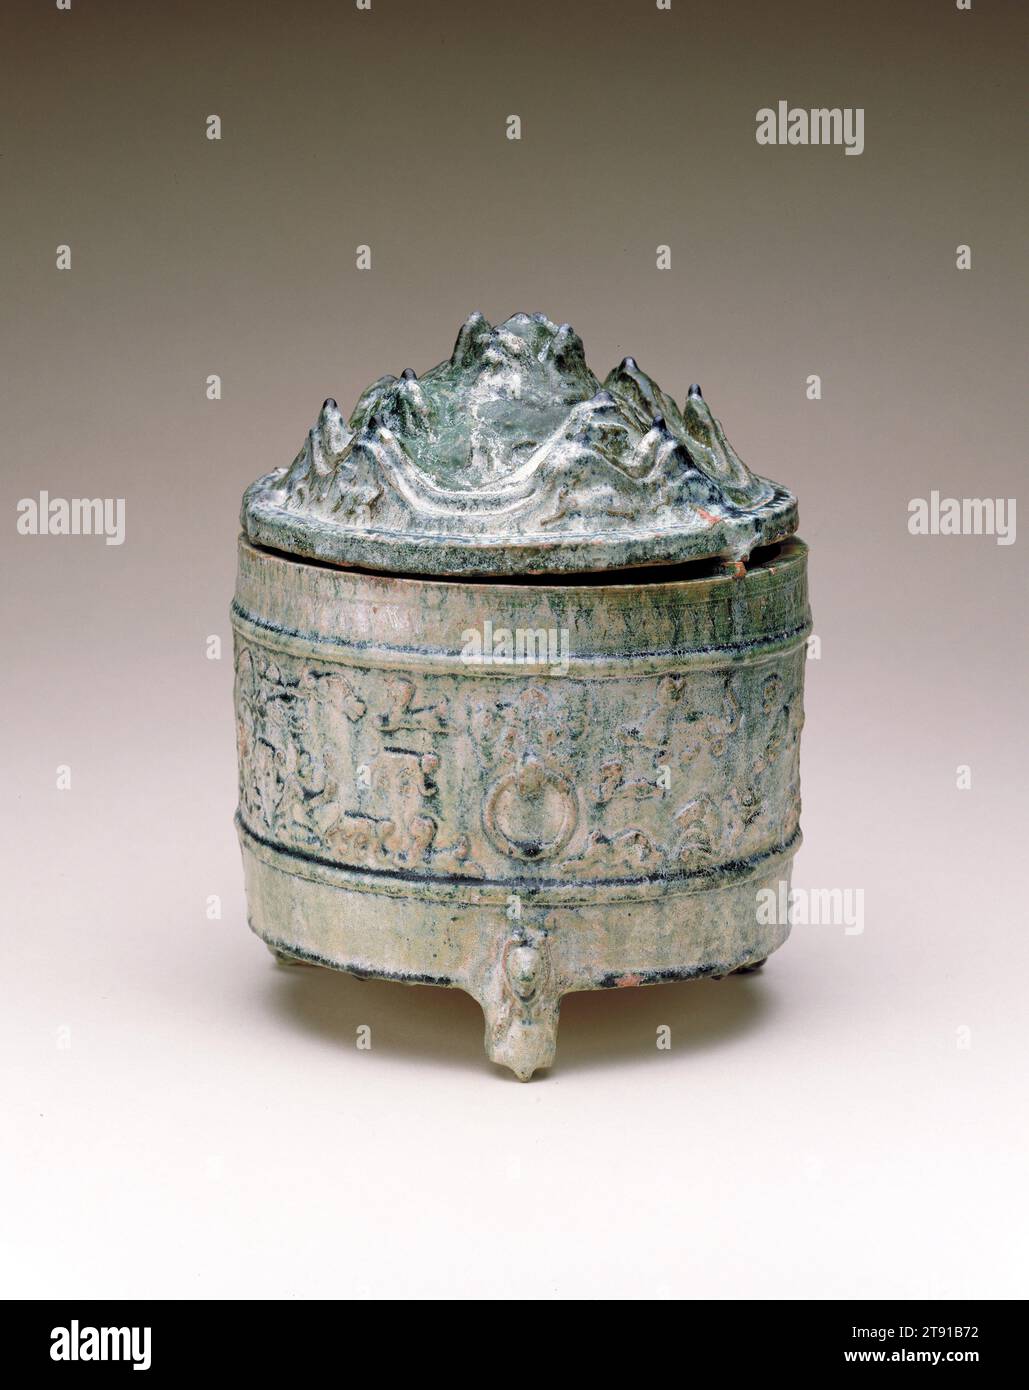 Lian (Cosmetic Container), 1st century, 10 1/8 x 7 7/8 x 7 7/8 in. (25.72 x 20 x 20 cm), Earthenware with molded decor under green glaze, China, 1st century, The cover of this jar depicts sacred mountains populated with animals of Han mythology, mainly dragons, tigers and bears. Around the main register is a landscape scene with hunters on horseback pursuing wild animals. Lian jars were used to store small items, especially cosmetics. The mountain peaks seen here and on the bo shan lu censer are inspired by popular Daoism and its fixation on immortality Stock Photo